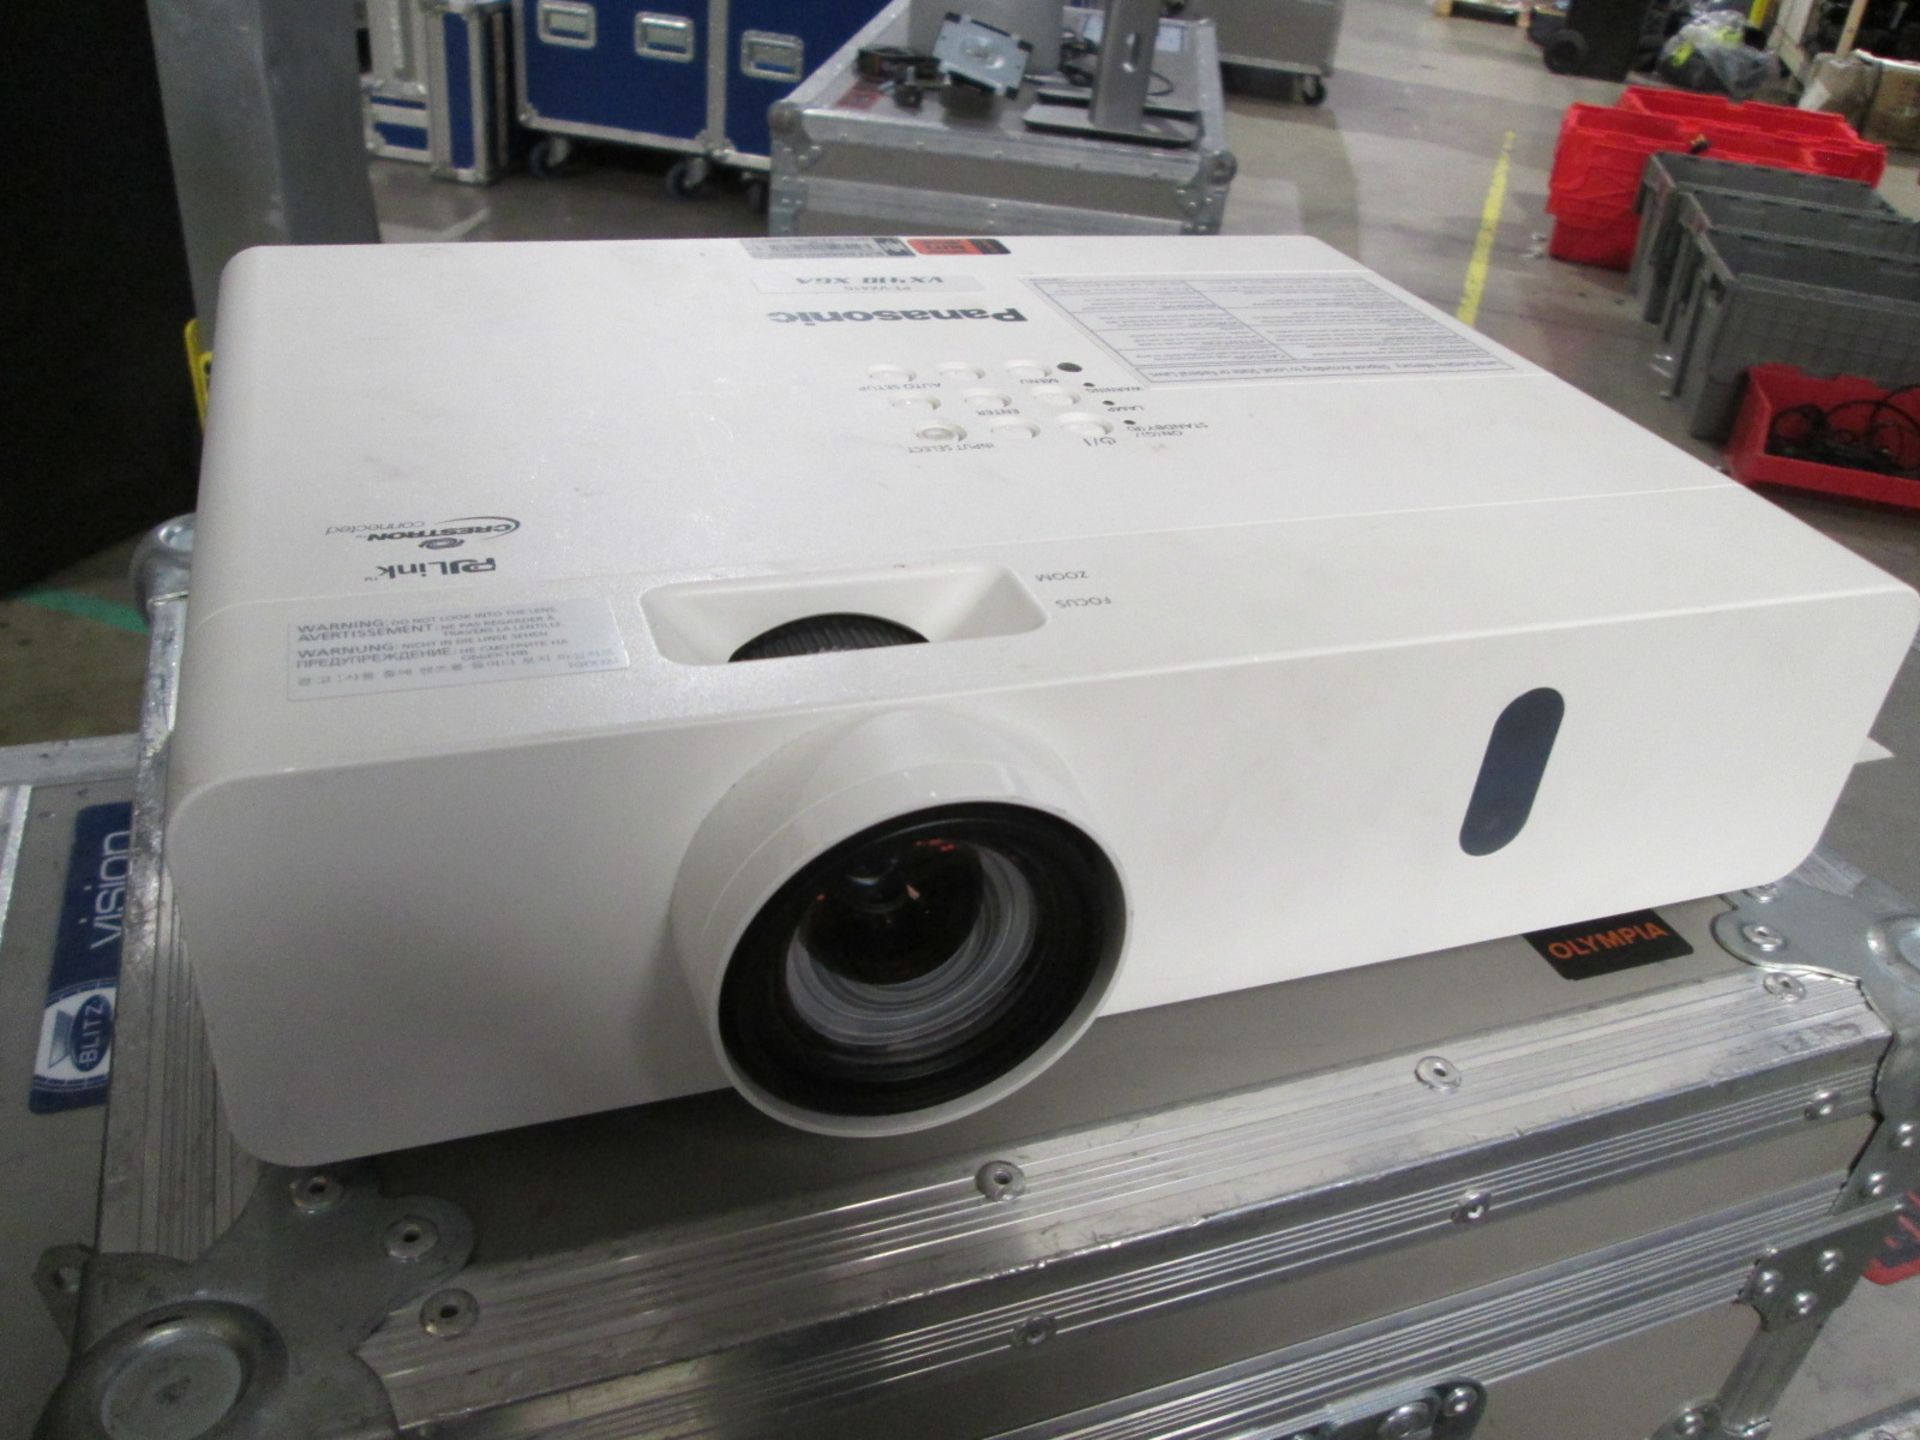 Panasonic PT-VX410Z LCD Projector, S/N DC4640045, YOM 2014, In flight case - Image 2 of 6